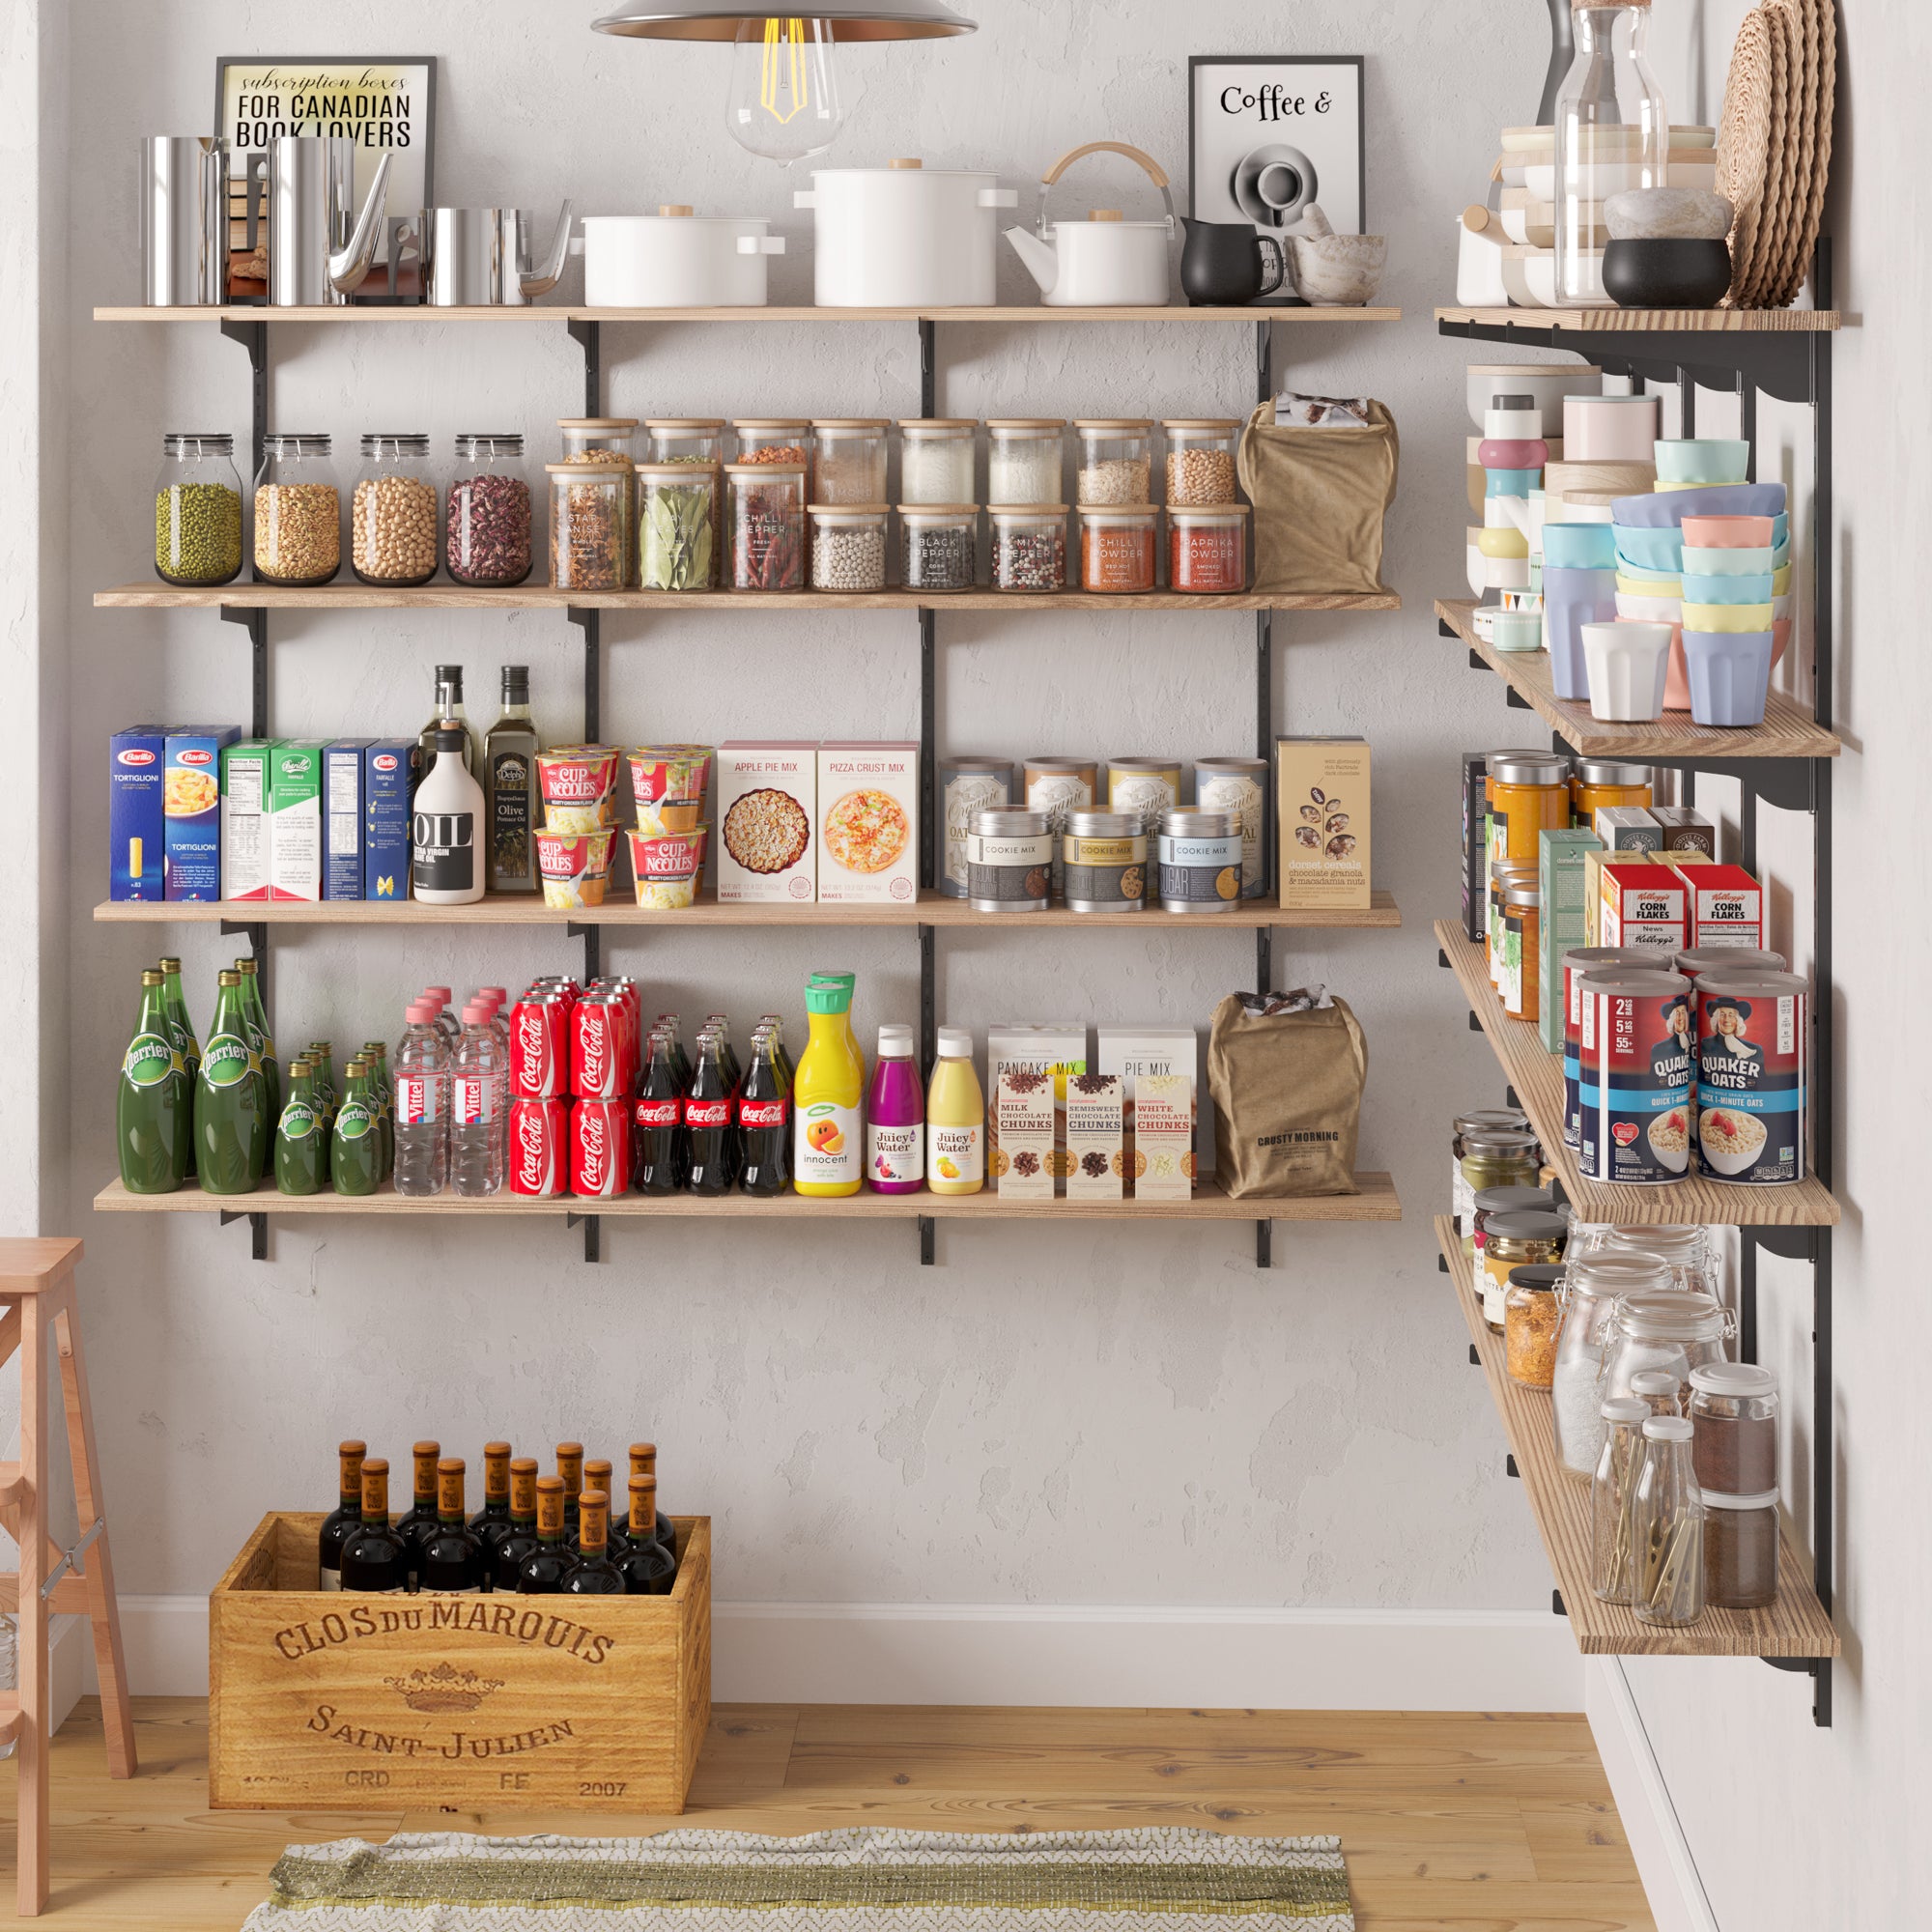 A neatly organized pantry shelf filled with bottled drinks, dry food items, and a wooden box of vintage wines, creating a rustic and functional kitchen space.